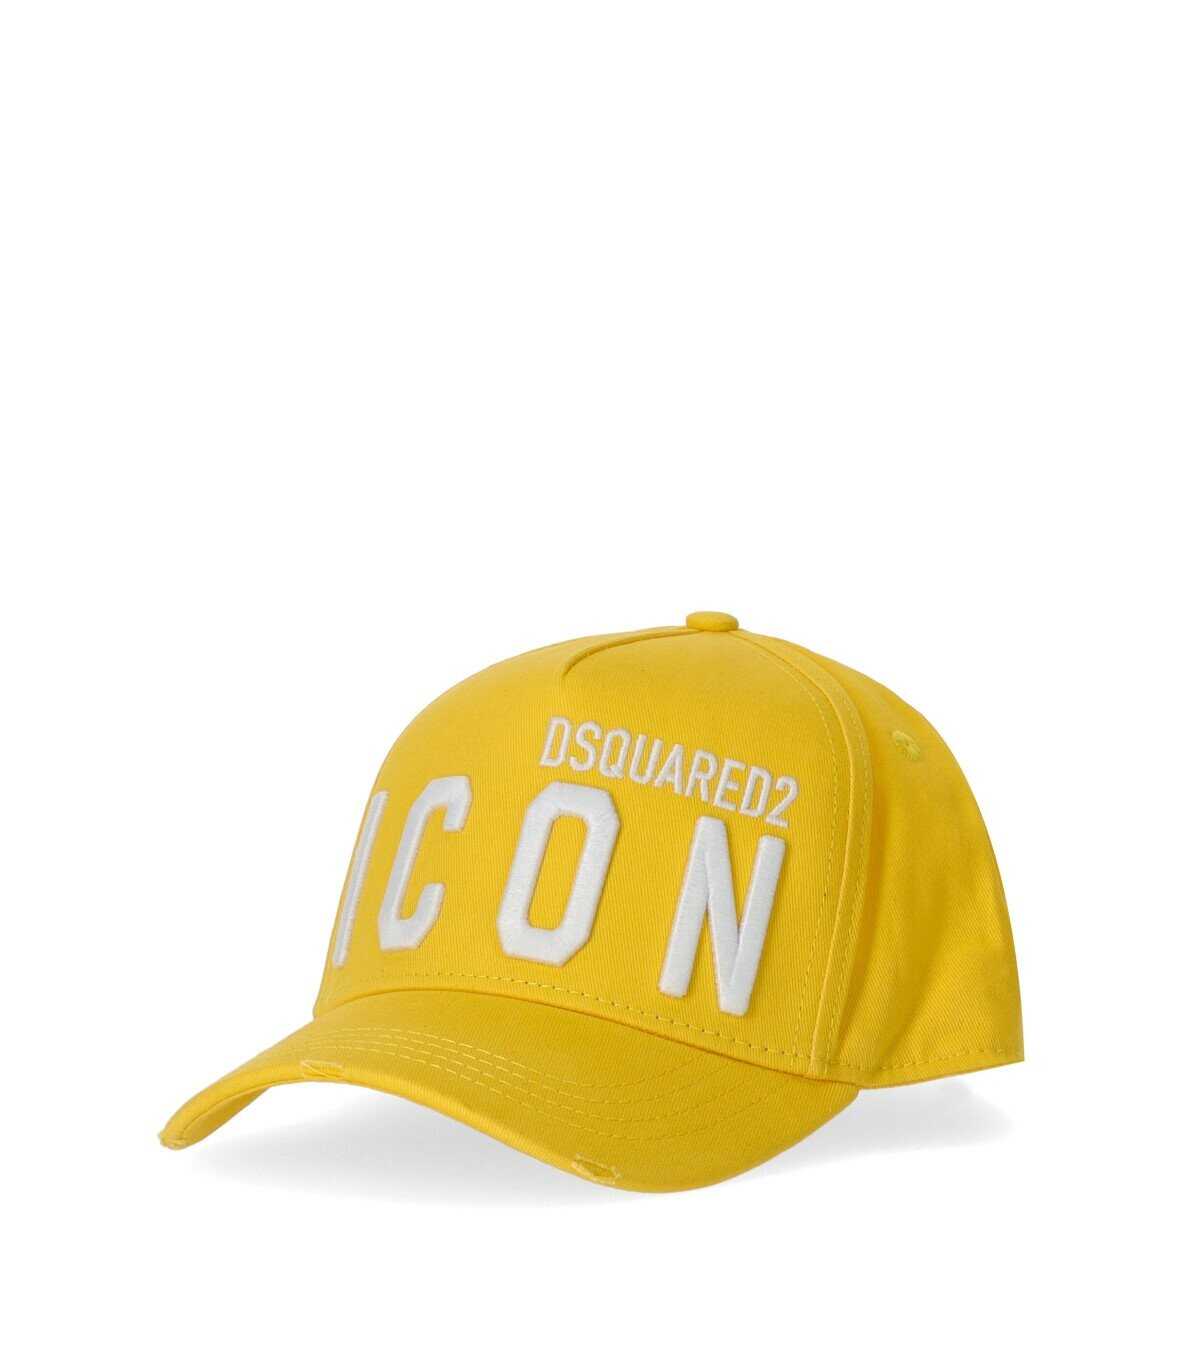 DSQUARED2 DSQUARED2 BE ICON YELLOW BASEBALL CAP Yellow